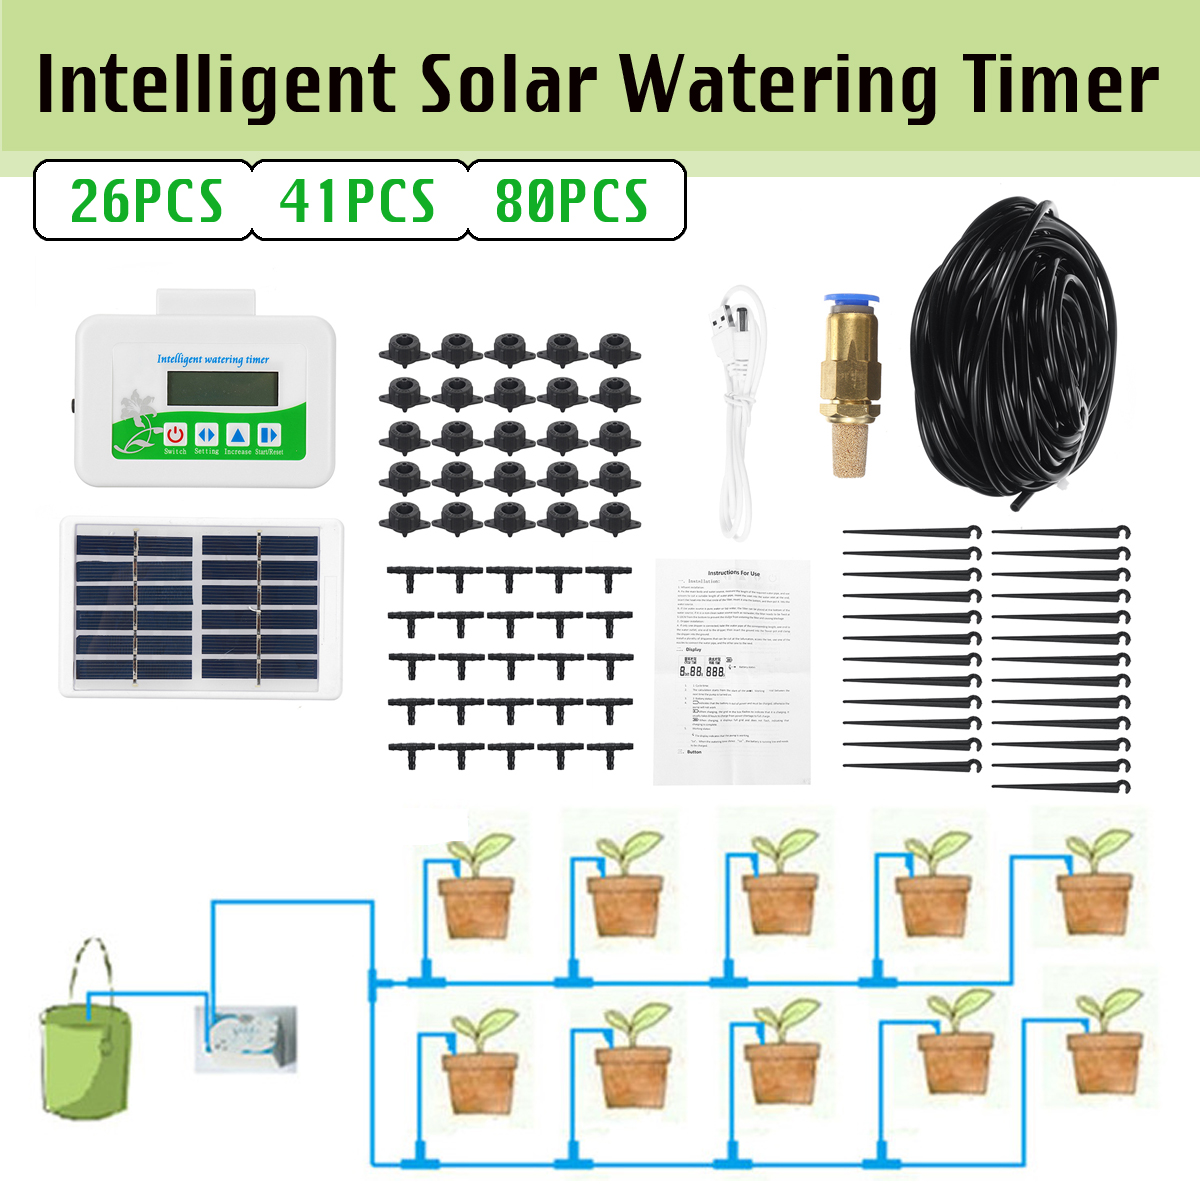 Intelligent-Watering-Timer-Automatic-Solar-Water-Controlle-Irrigation-System-Kit-1711287-1